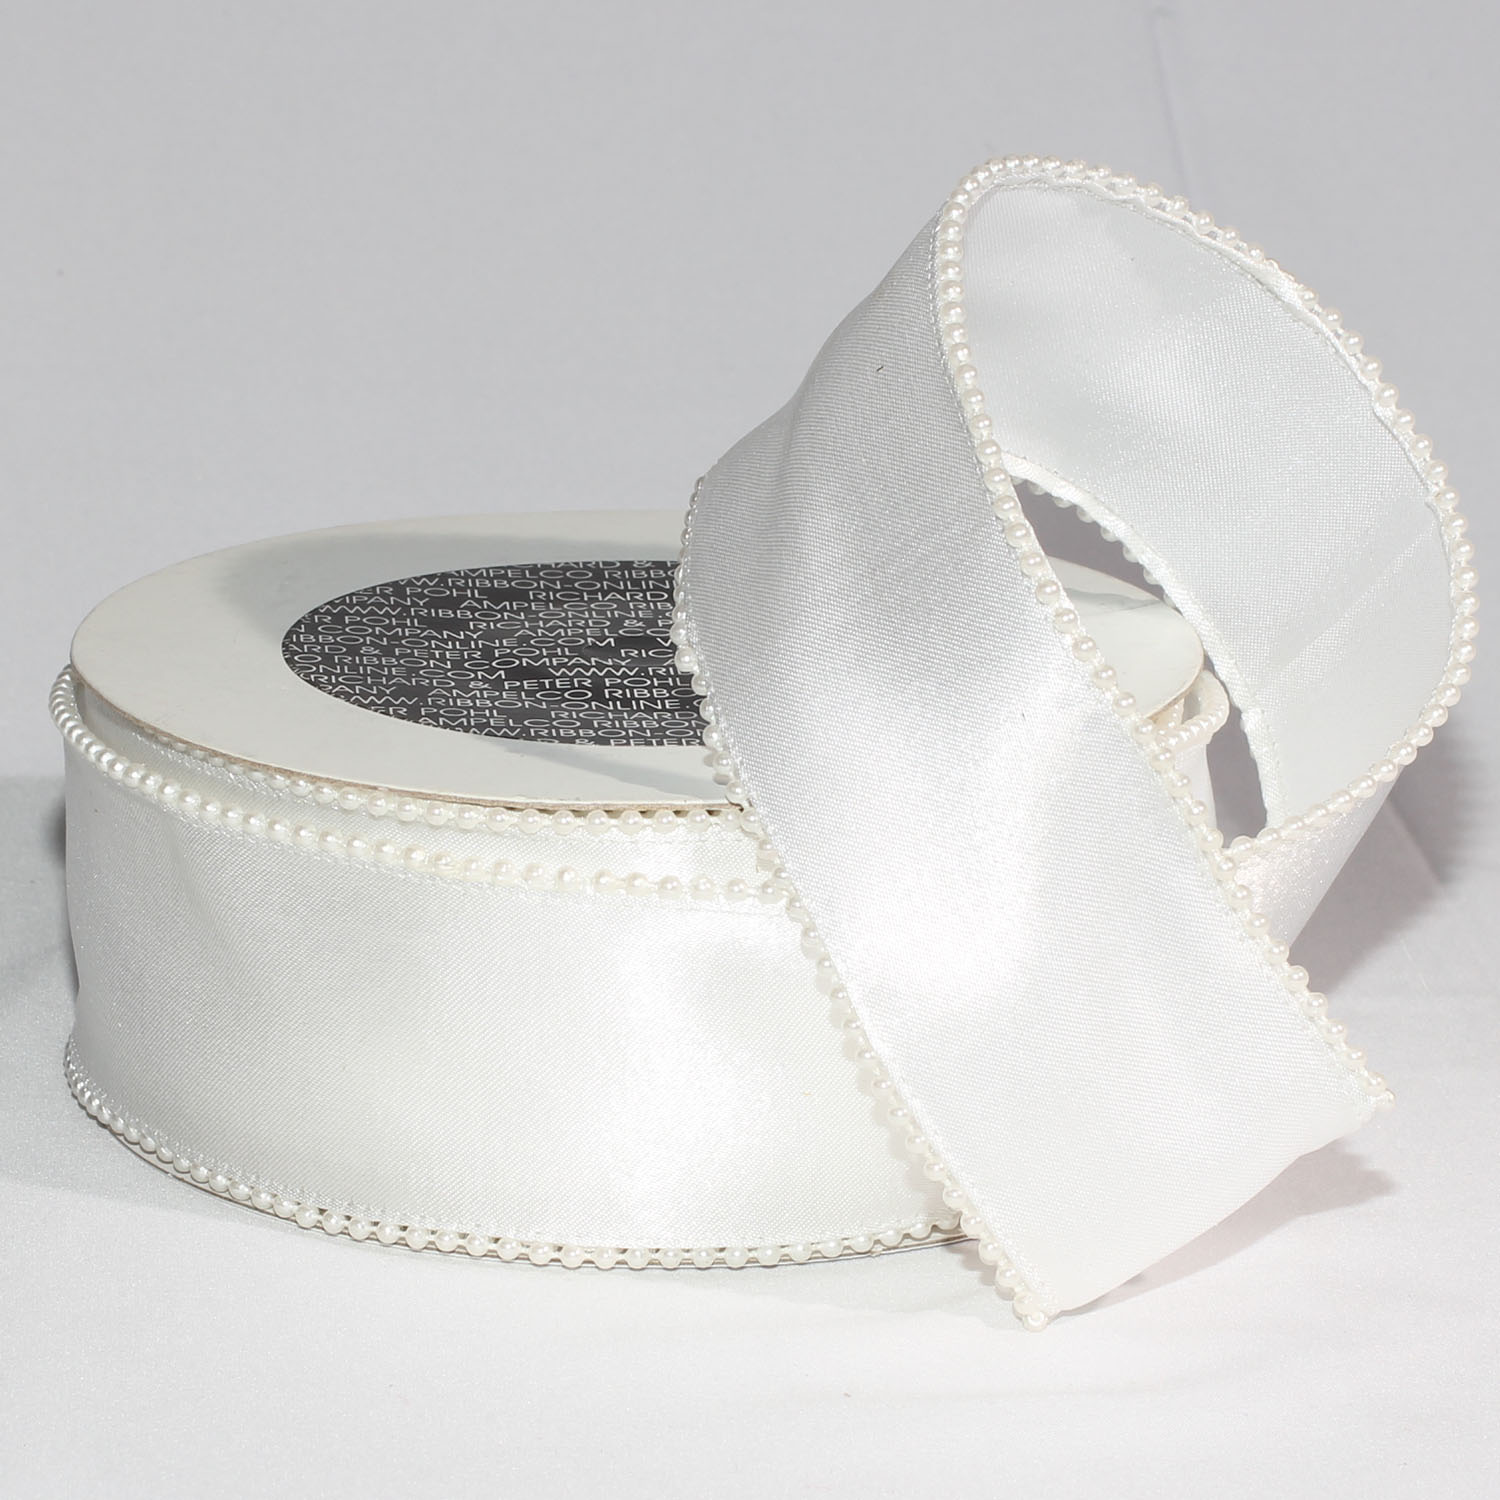 The Ribbon People White Pearl Edge Satin Wired Craft Ribbon 2" x 20 Yards